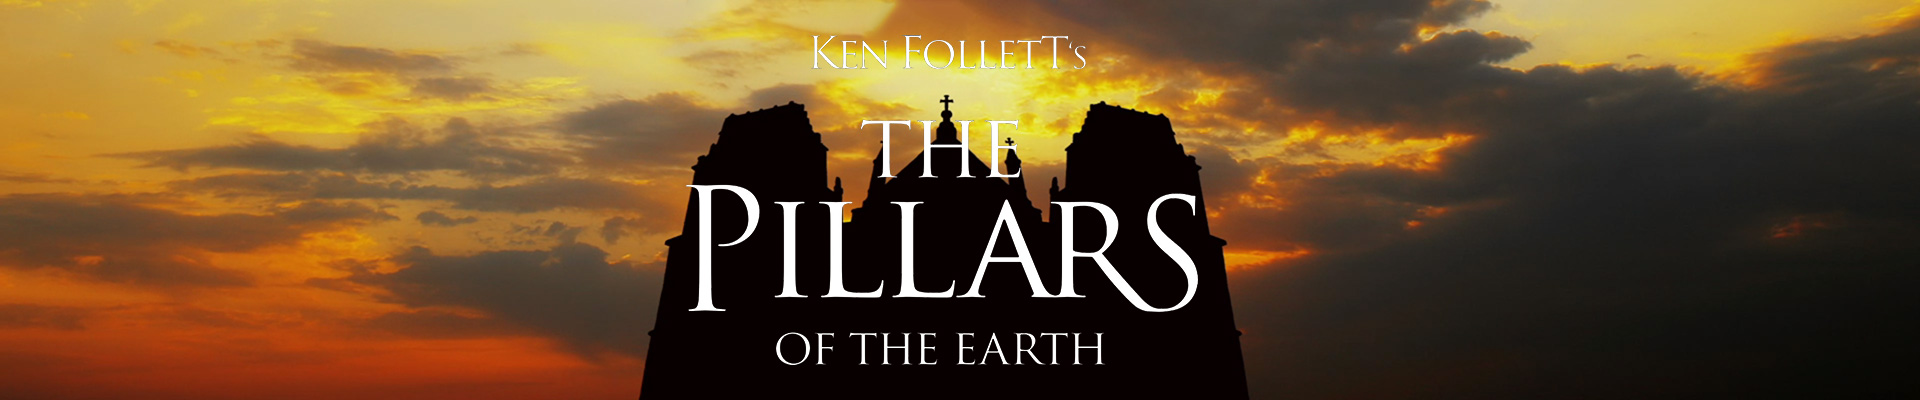 Happy about: Ken Follett’s The Pillars of the Earth